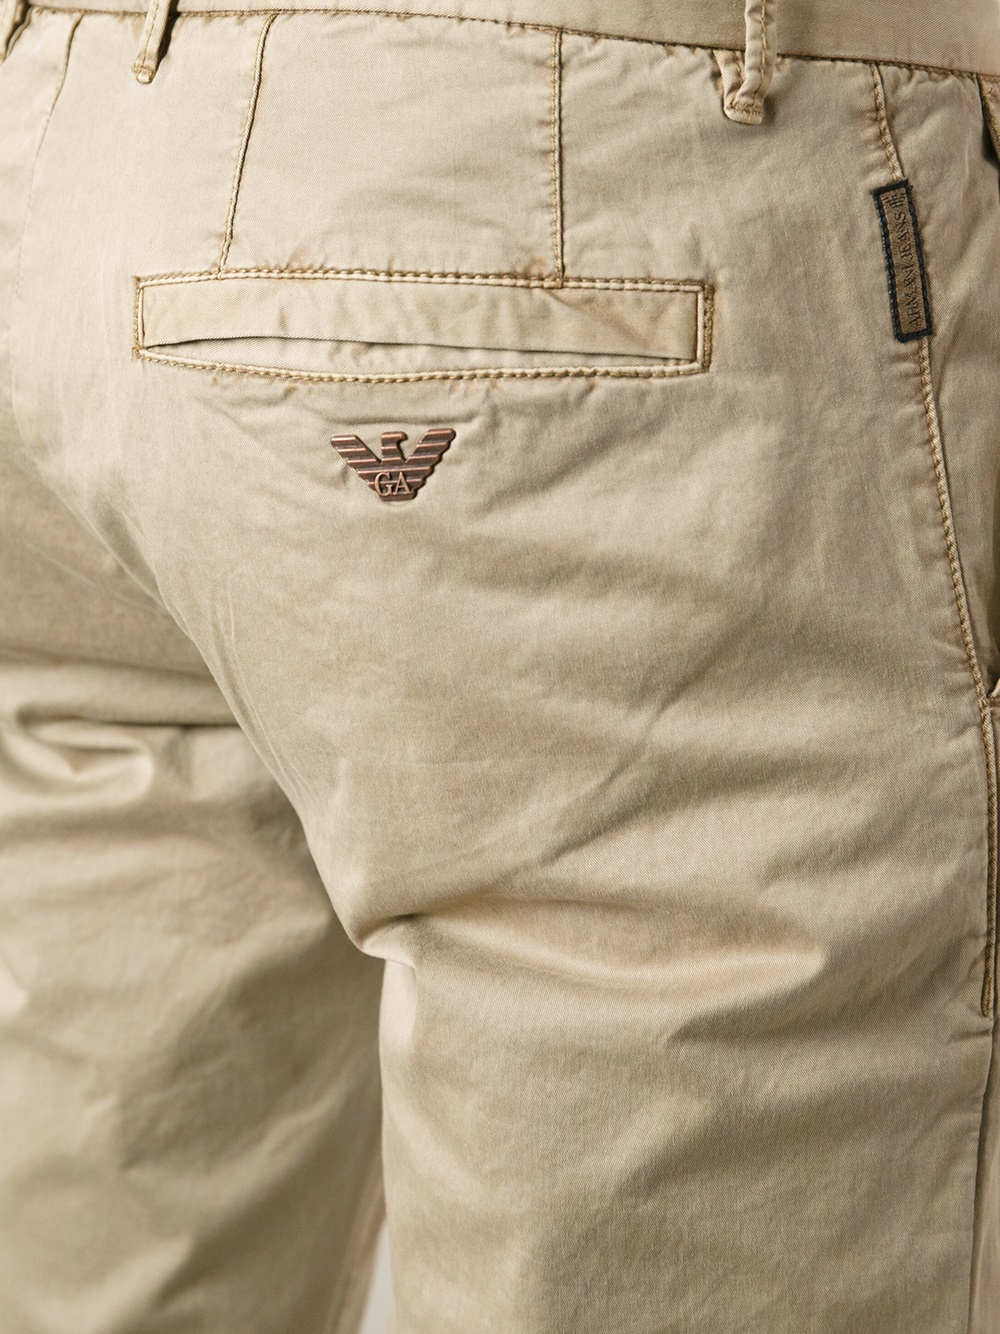 armani jeans chinos - 57% OFF 